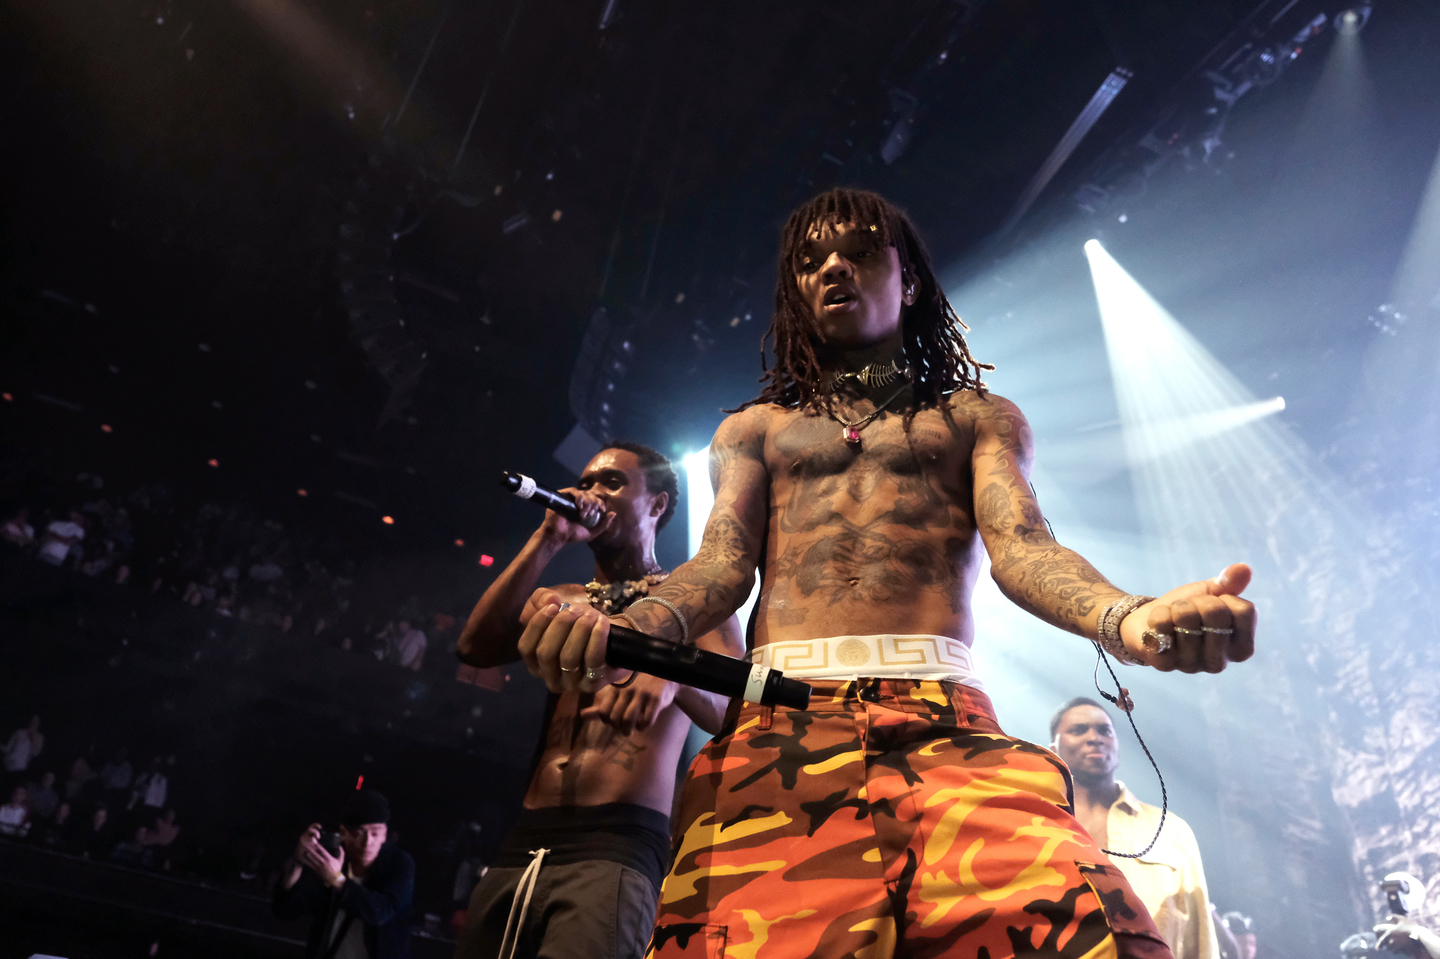 Rae Sremmurd headlined the SXSW Takeover showcase at ACL Live at the Moody Theater. Photo by Hubert Vestil/Getty Images for SXSW